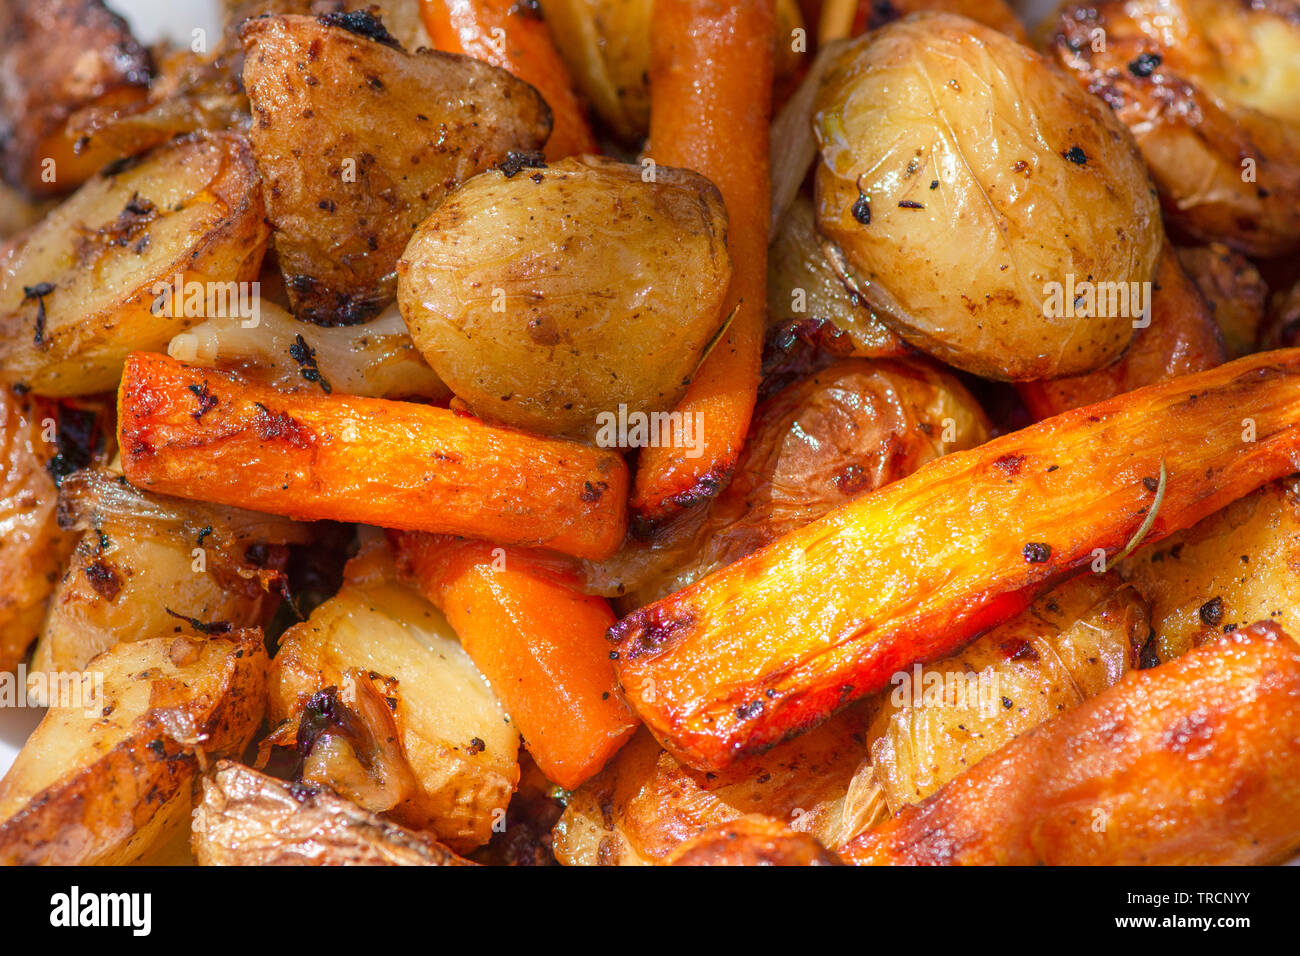 Oven roasted potatoes with onions and carrots. Stock Photo